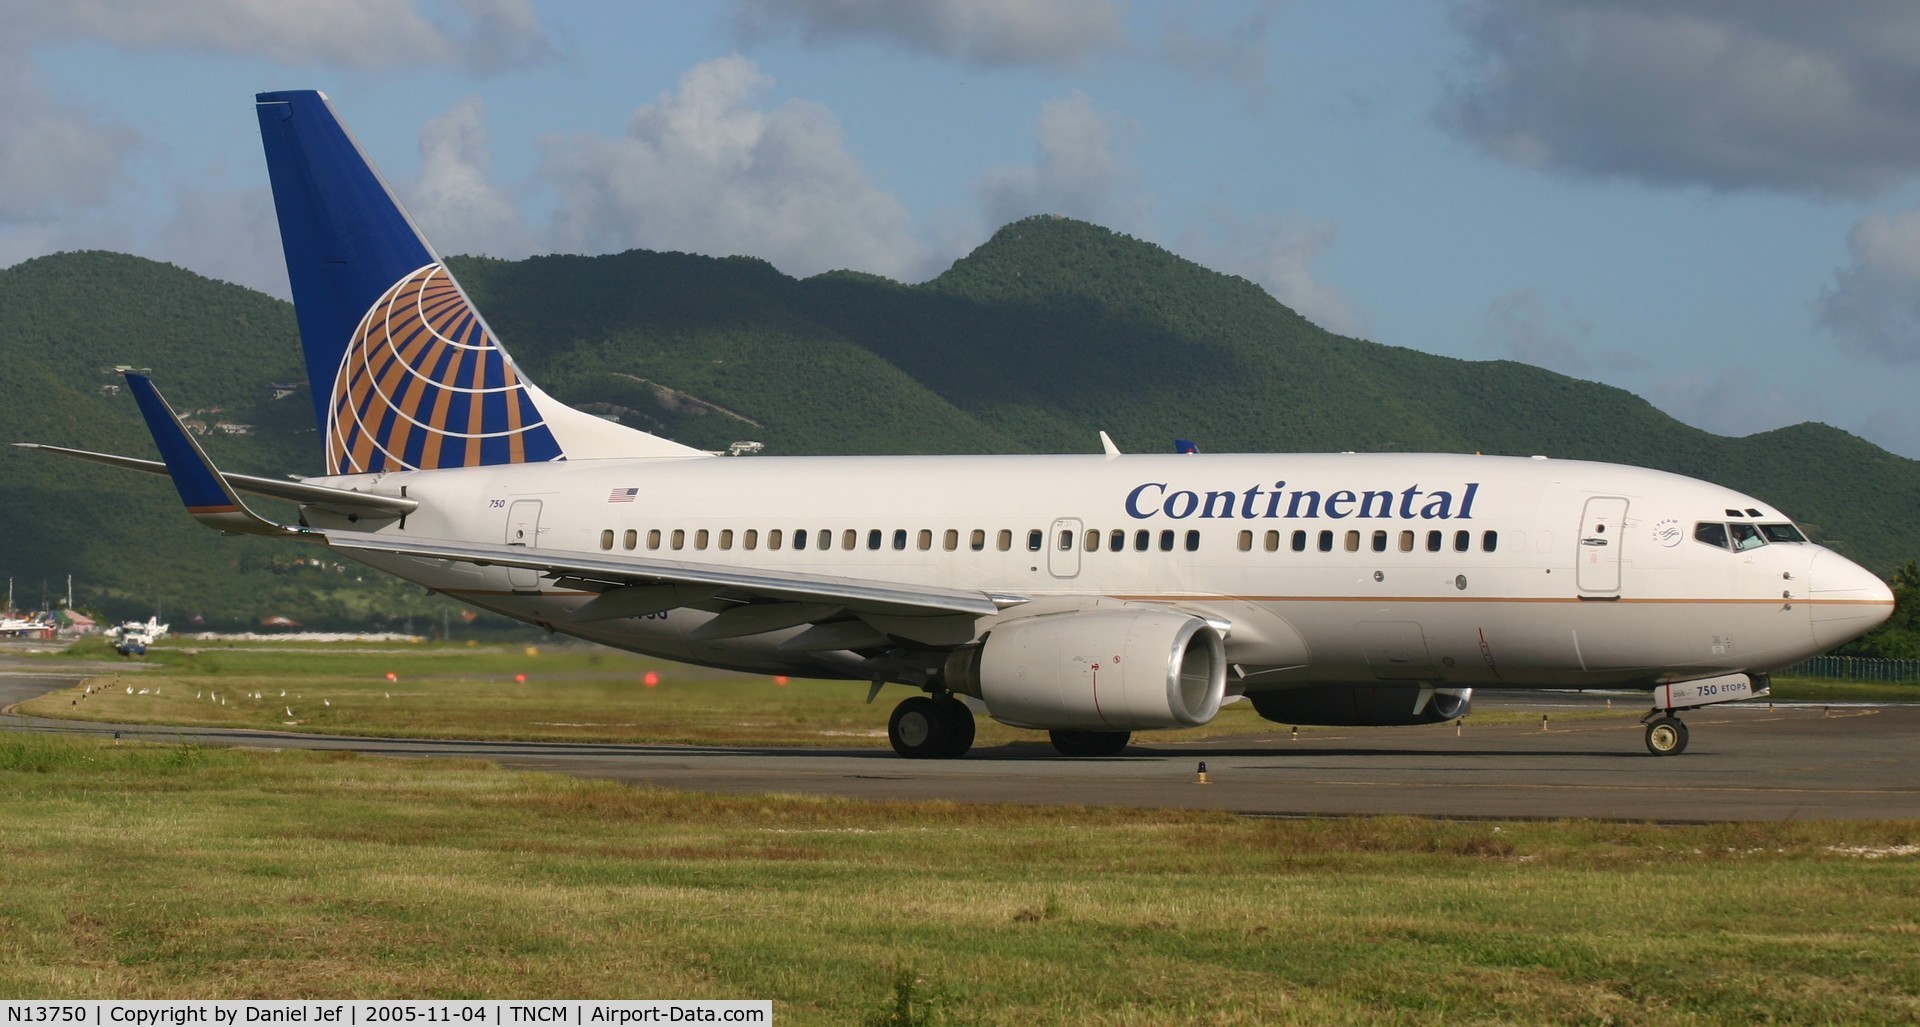 N13750, 1999 Boeing 737-724 C/N 28941, taxing for take off